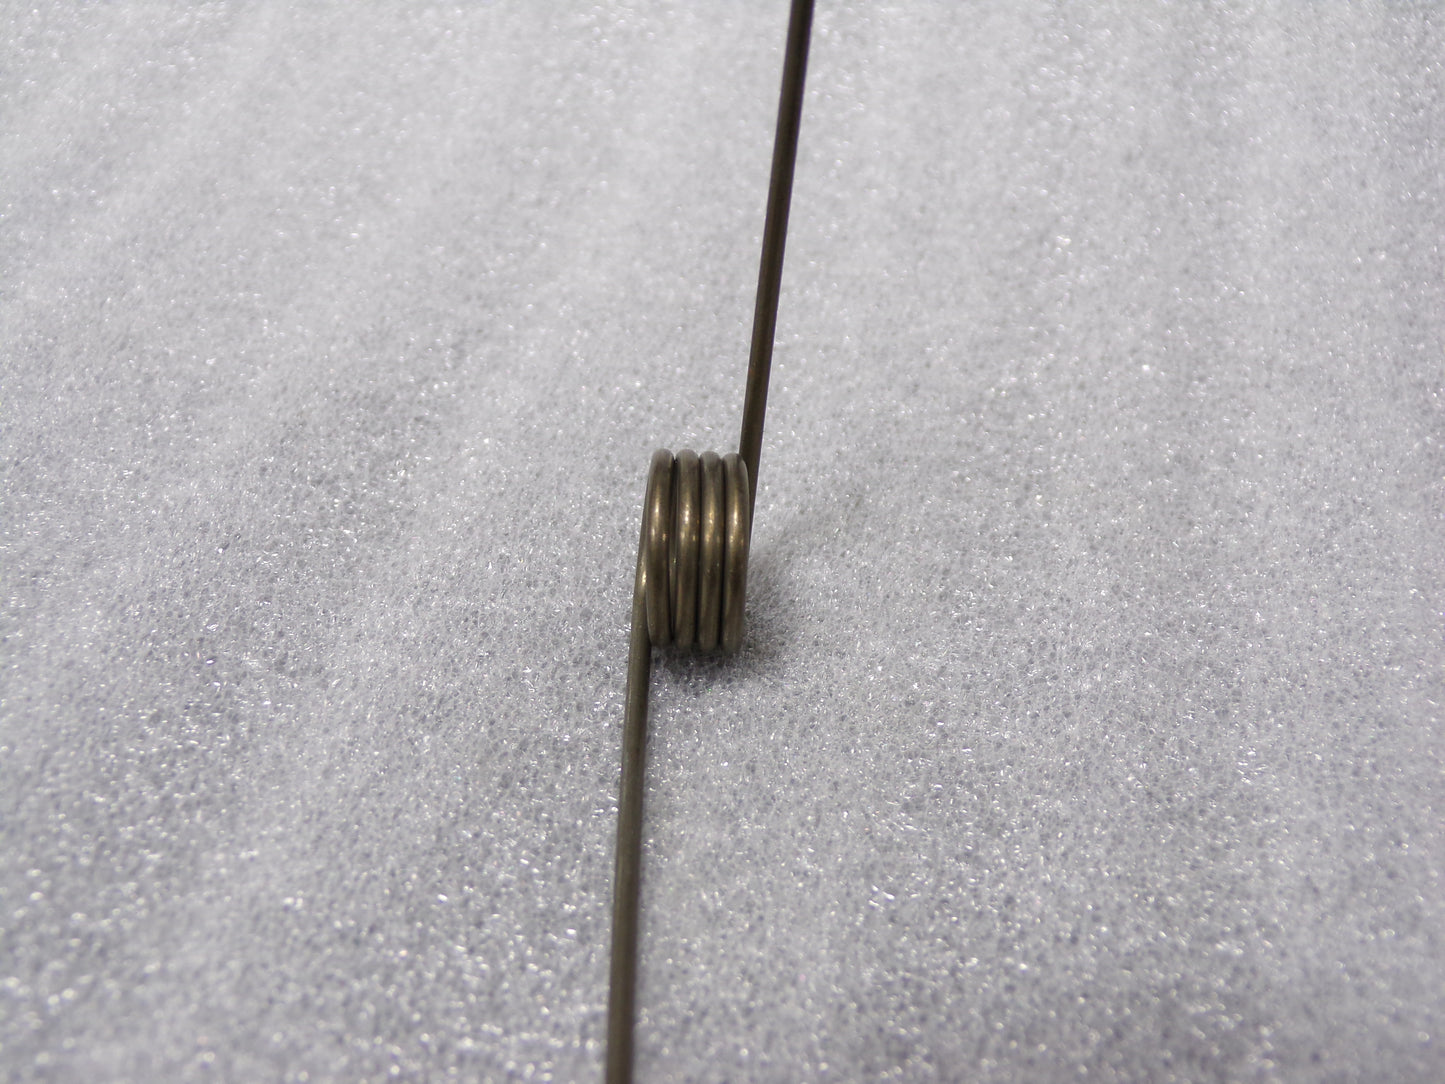 90 Degree Carbon Steel Music Wire Torsion Spring with 0.408 in Outside Dia. (CR00191-BT26)